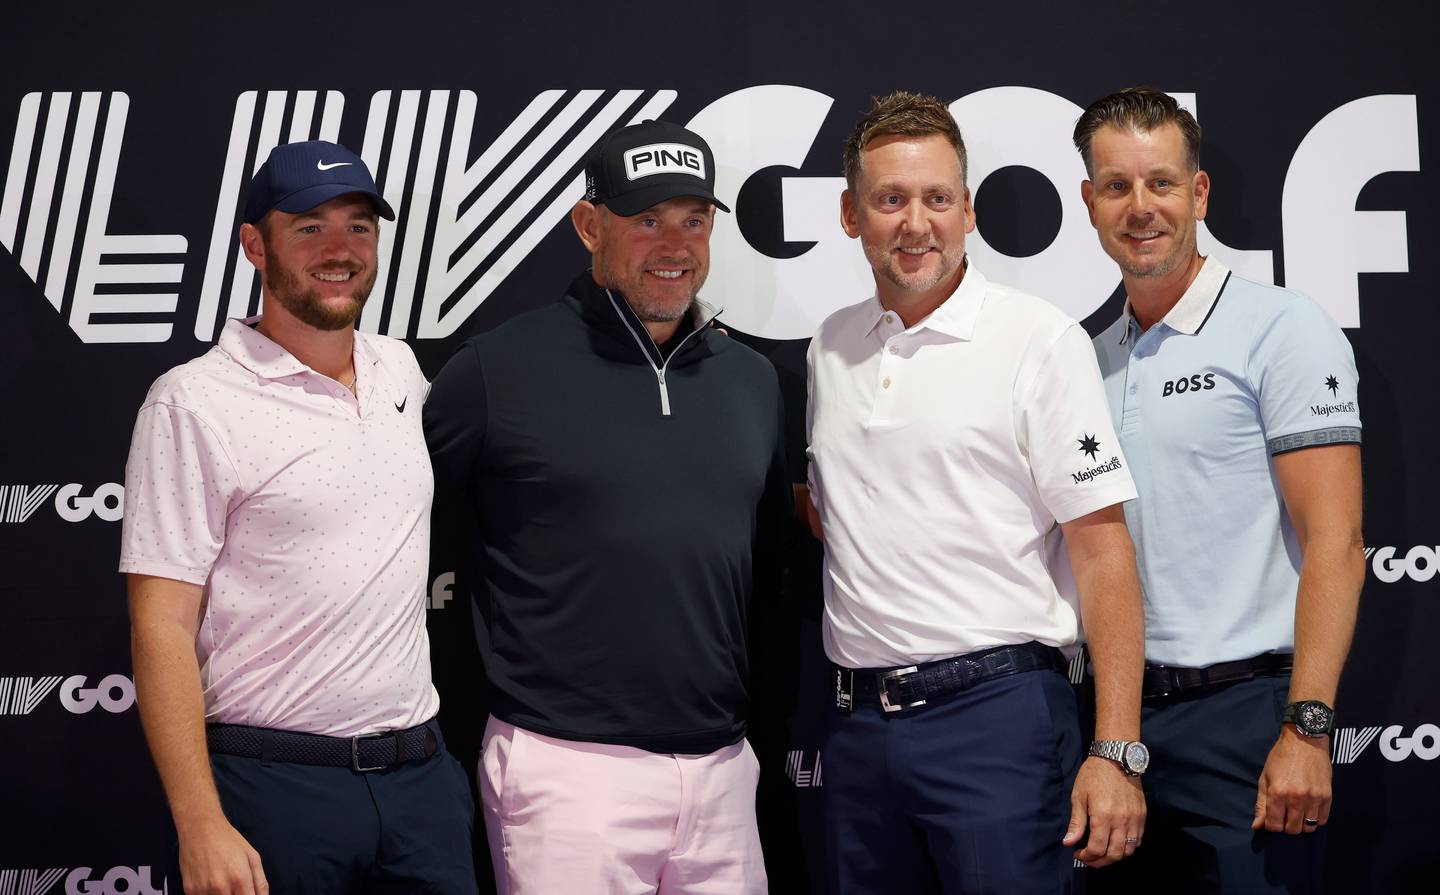 Left to right: Sam Horsfield, Lee Westwood, Ian Poulter and Henrik Stenson ahead of the LIV Golf Invitational at Trump National Golf Club in New Jersey. Getty